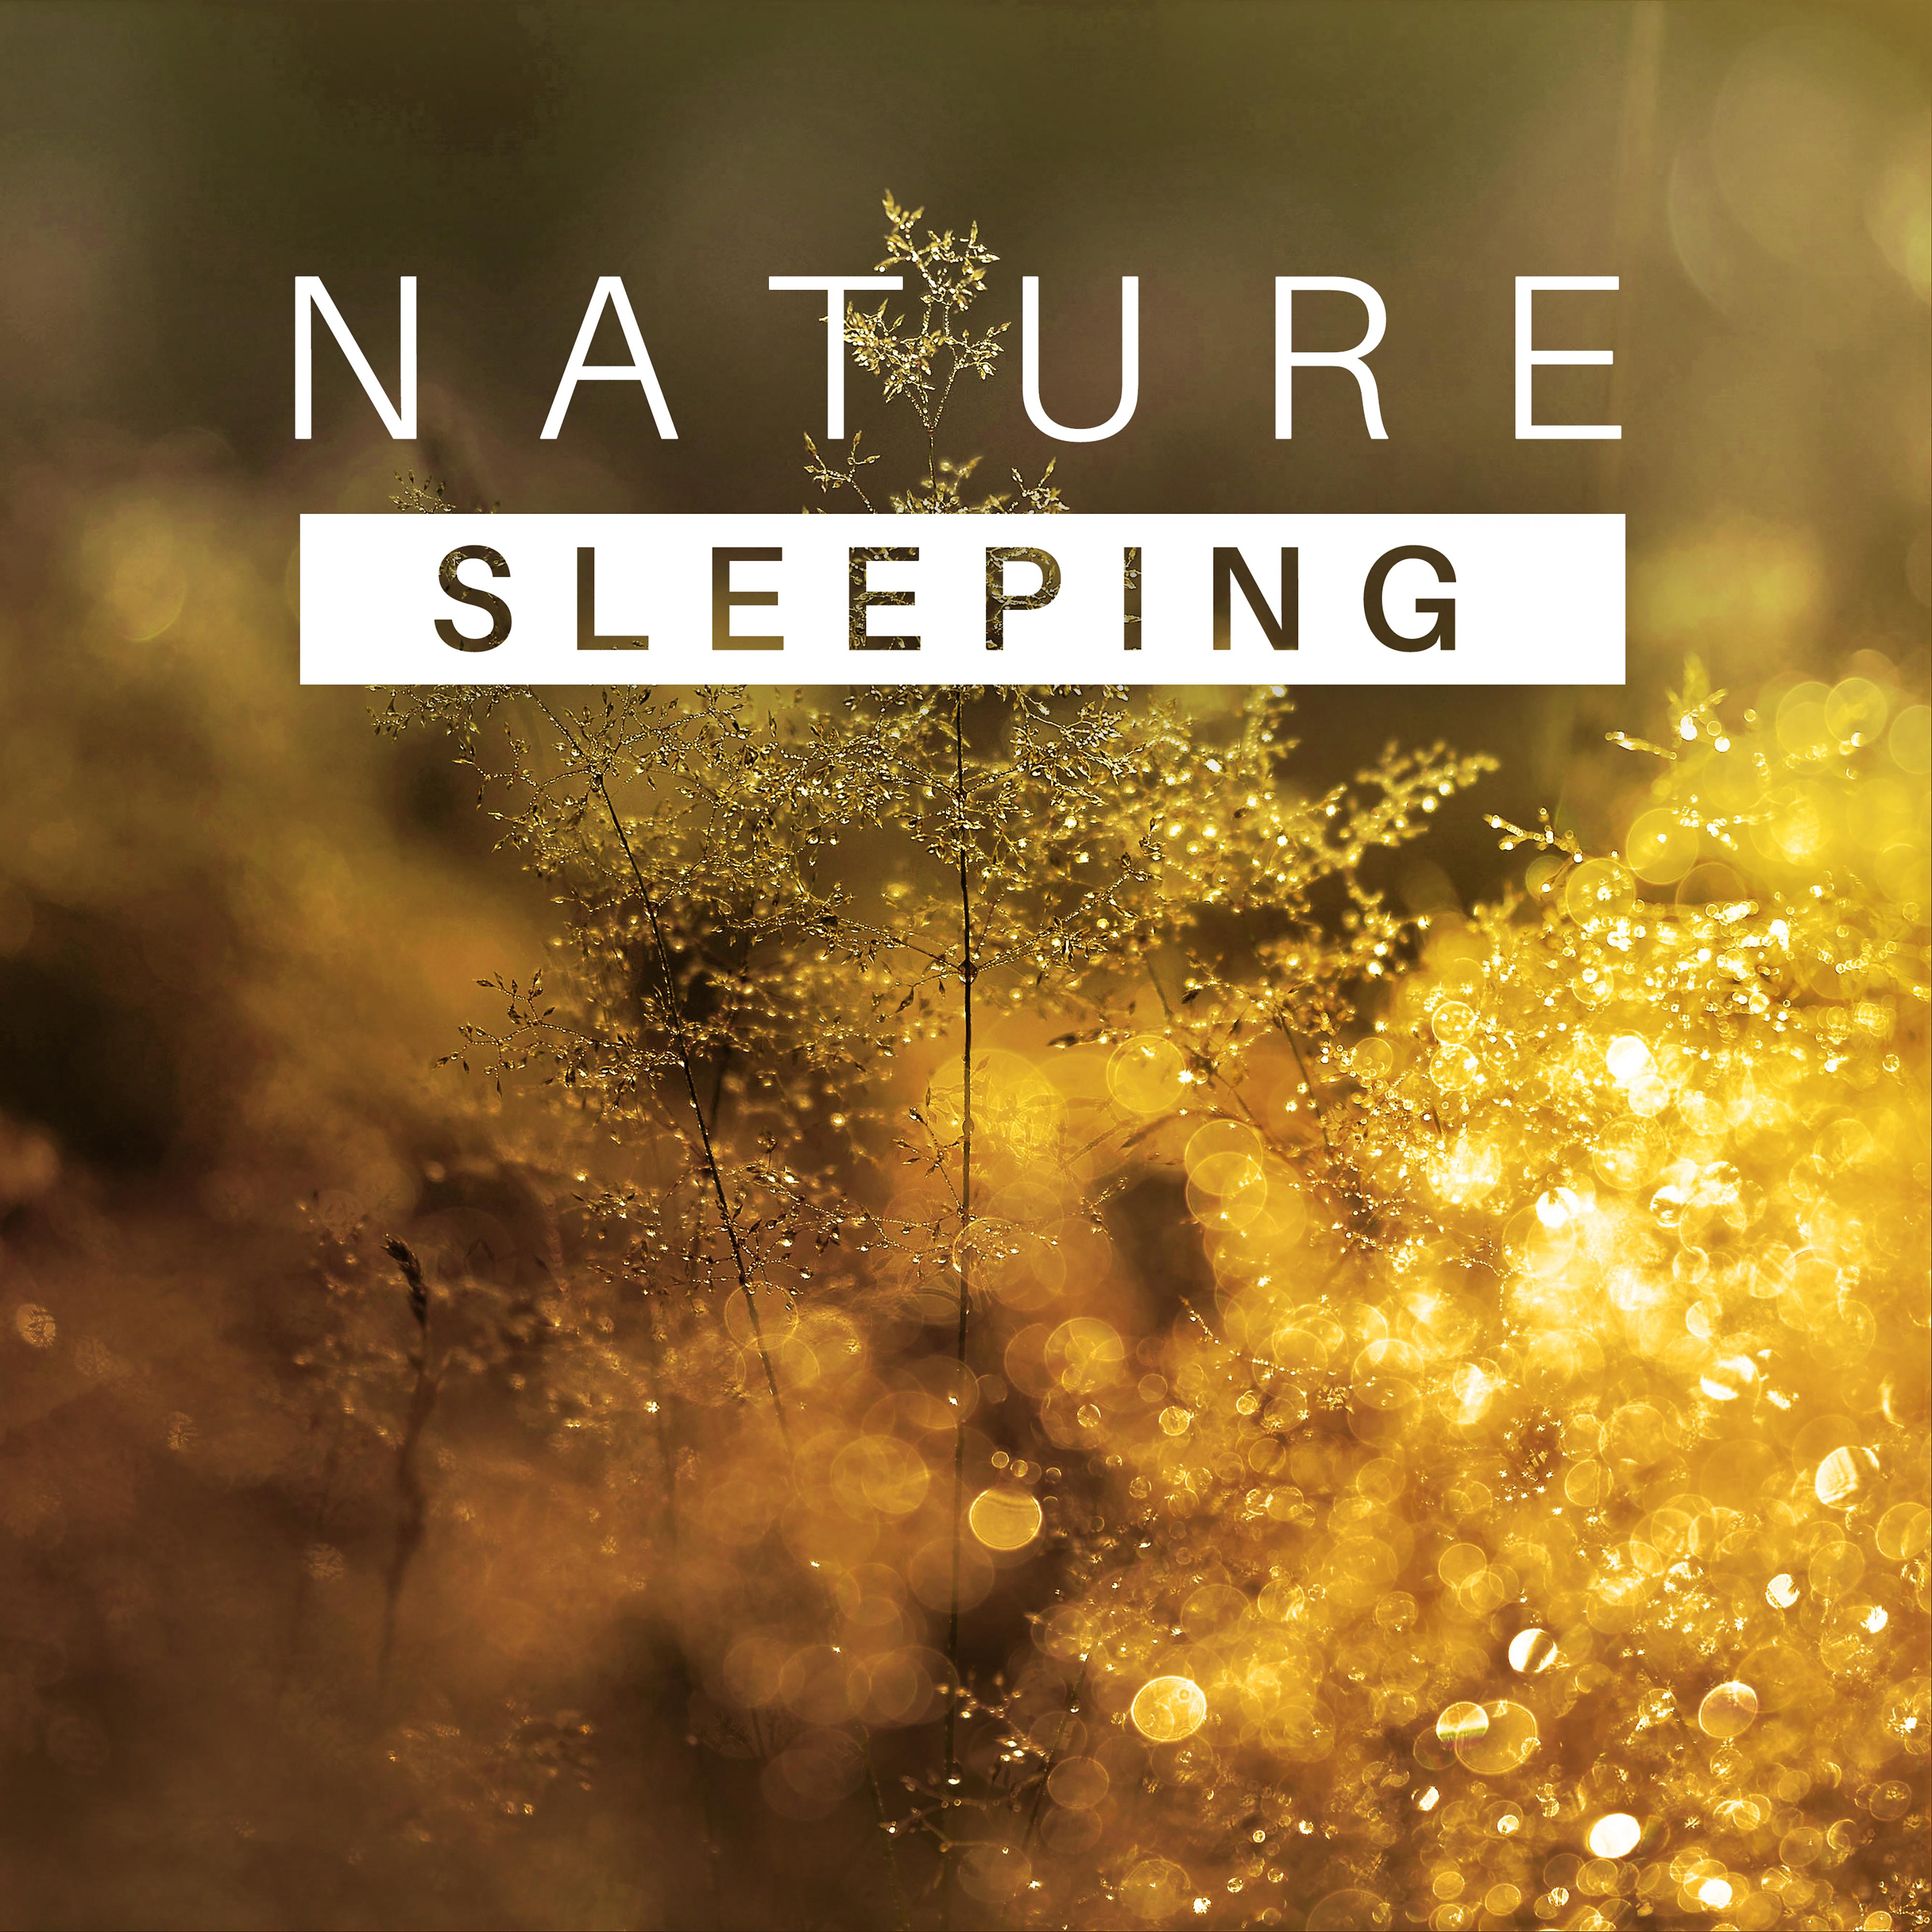 Sleeping Nature  Healing Music for Relaxation, Stress Relief, Sounds of Water, Singing Birds, Nature Sounds to Calm Down, Pure Mind